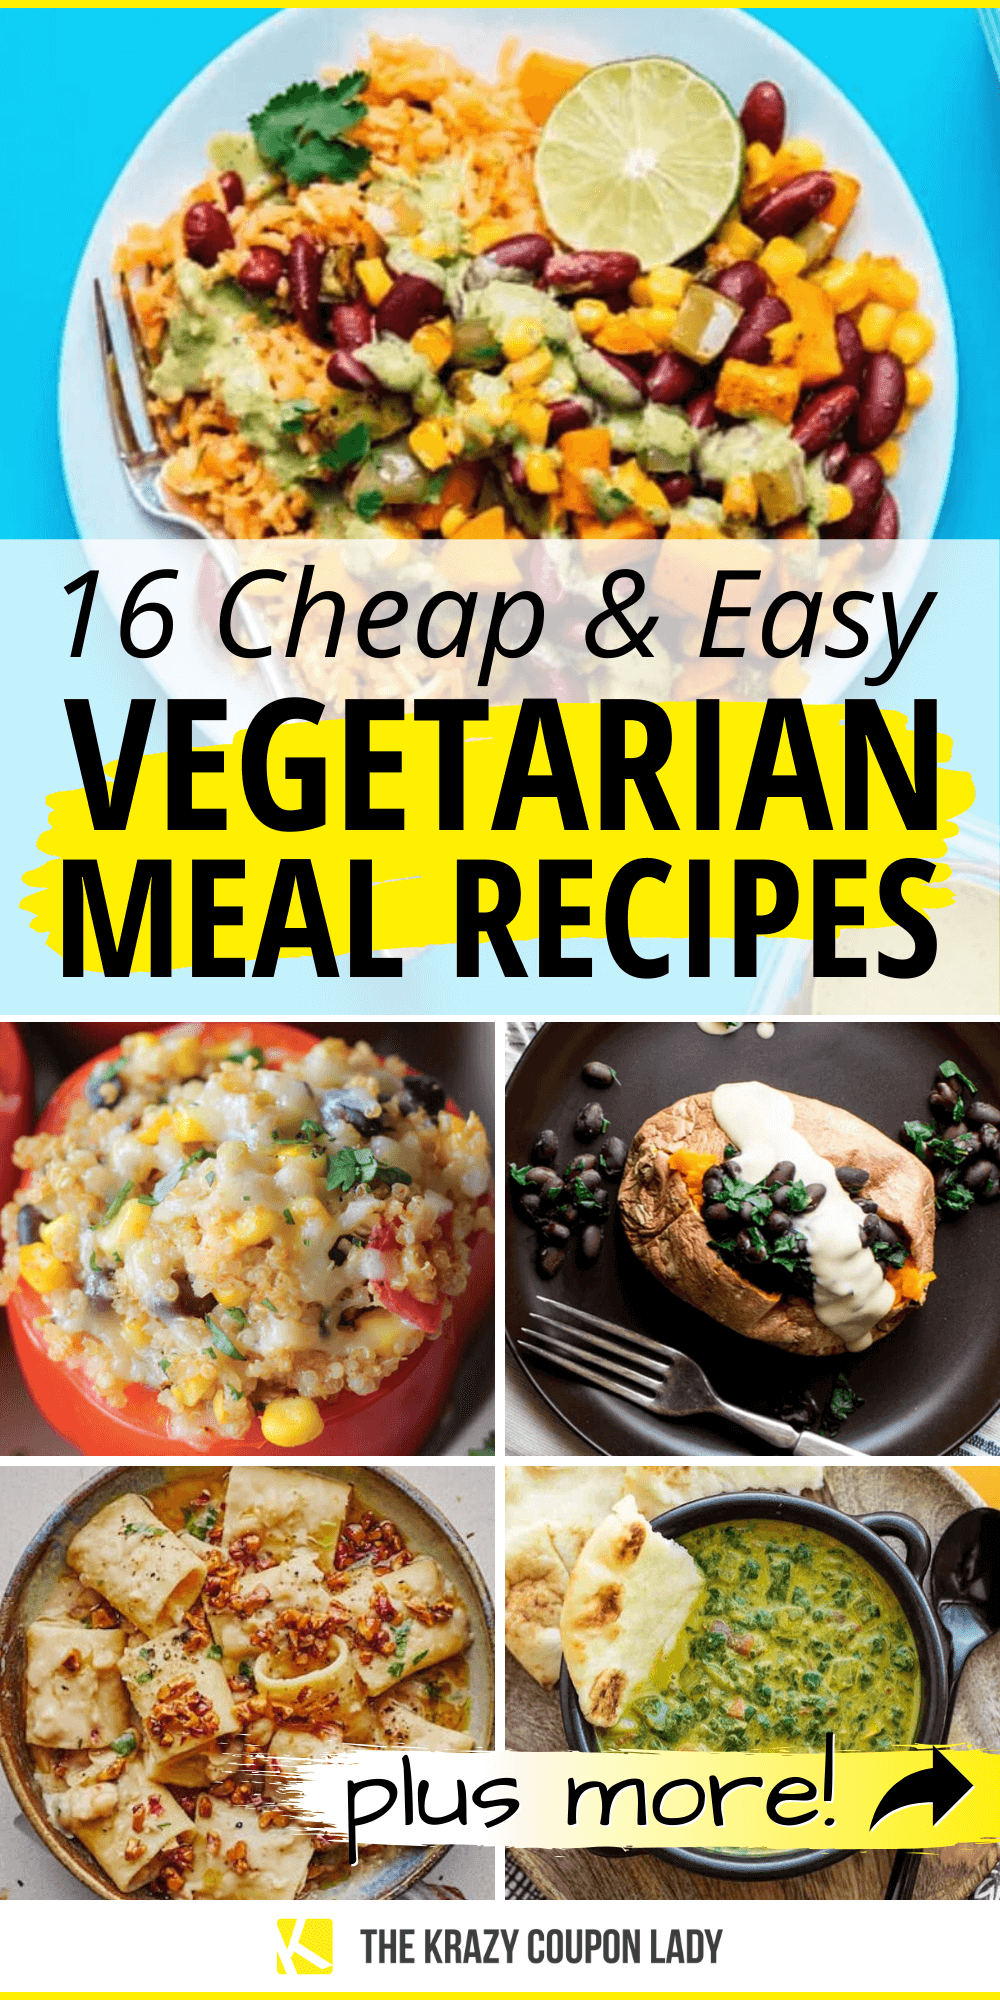 16 Cheap and Easy Vegetarian Recipes - The Krazy Coupon Lady